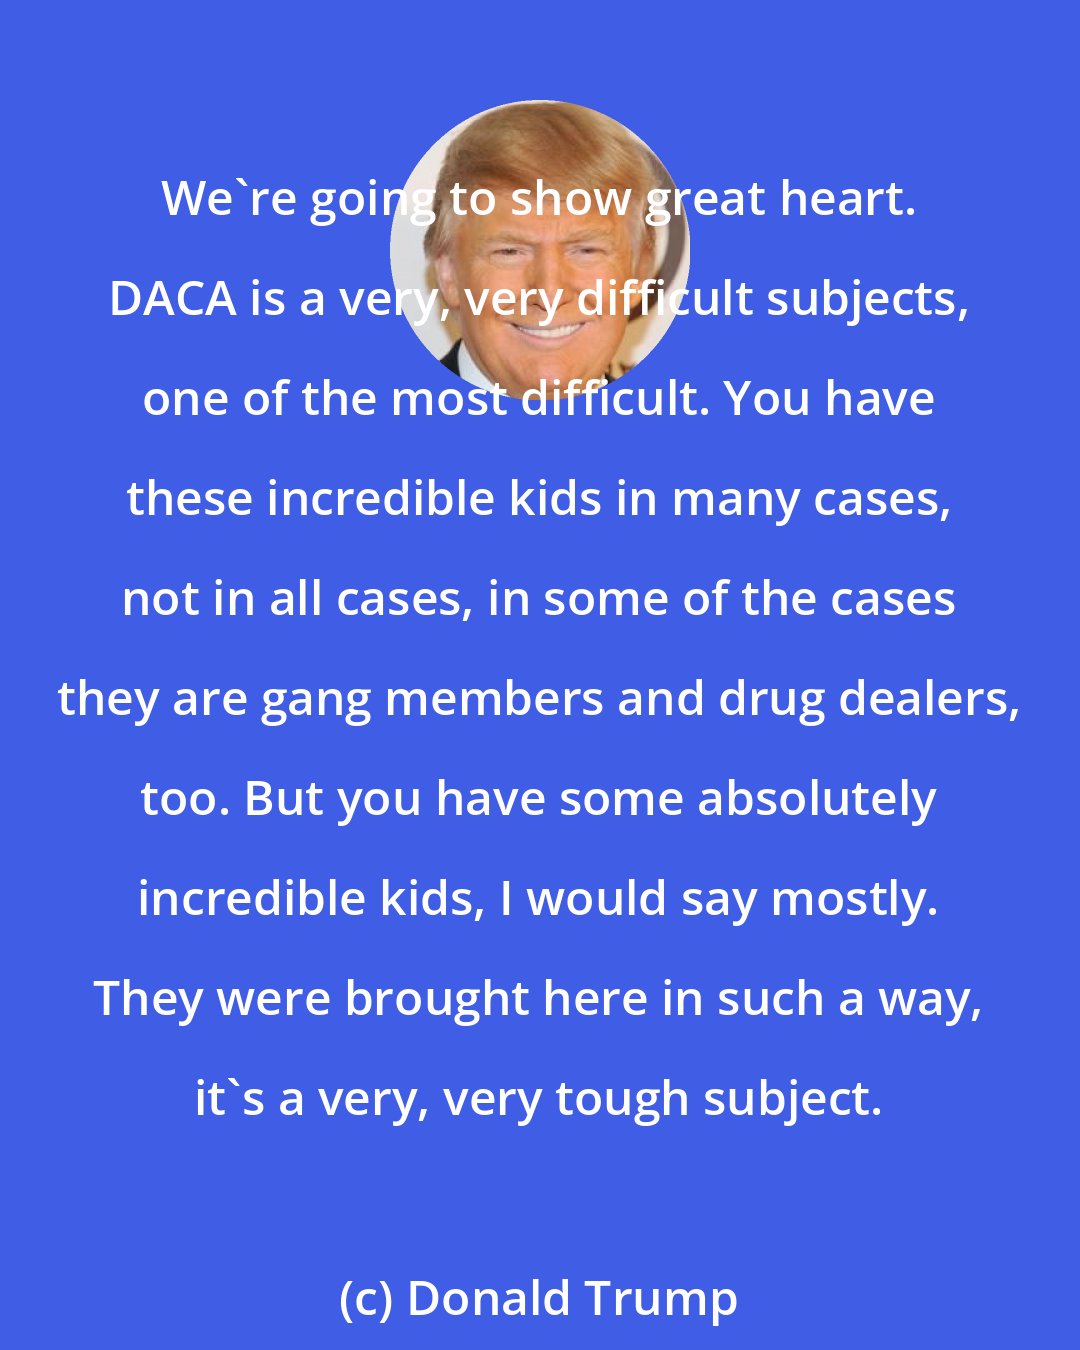 Donald Trump: We're going to show great heart. DACA is a very, very difficult subjects, one of the most difficult. You have these incredible kids in many cases, not in all cases, in some of the cases they are gang members and drug dealers, too. But you have some absolutely incredible kids, I would say mostly. They were brought here in such a way, it's a very, very tough subject.